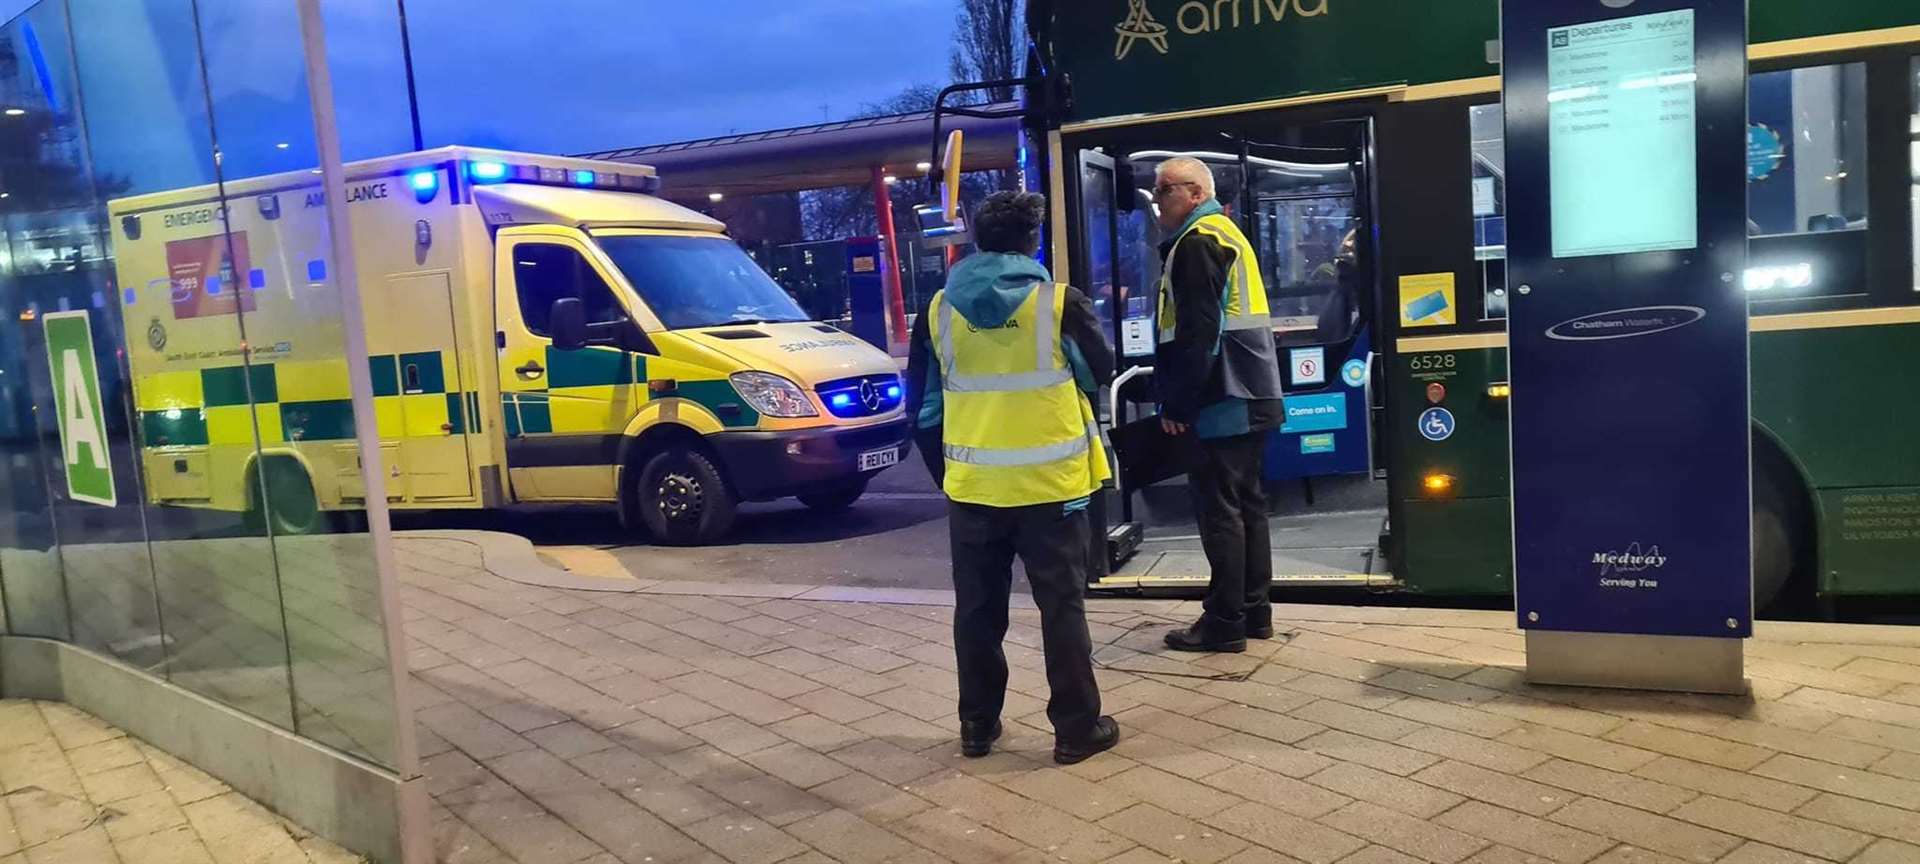 Paramedics were called to Chatham Waterfront station after a person collapsed on a bus. Picture: Medway Liberal Democrats